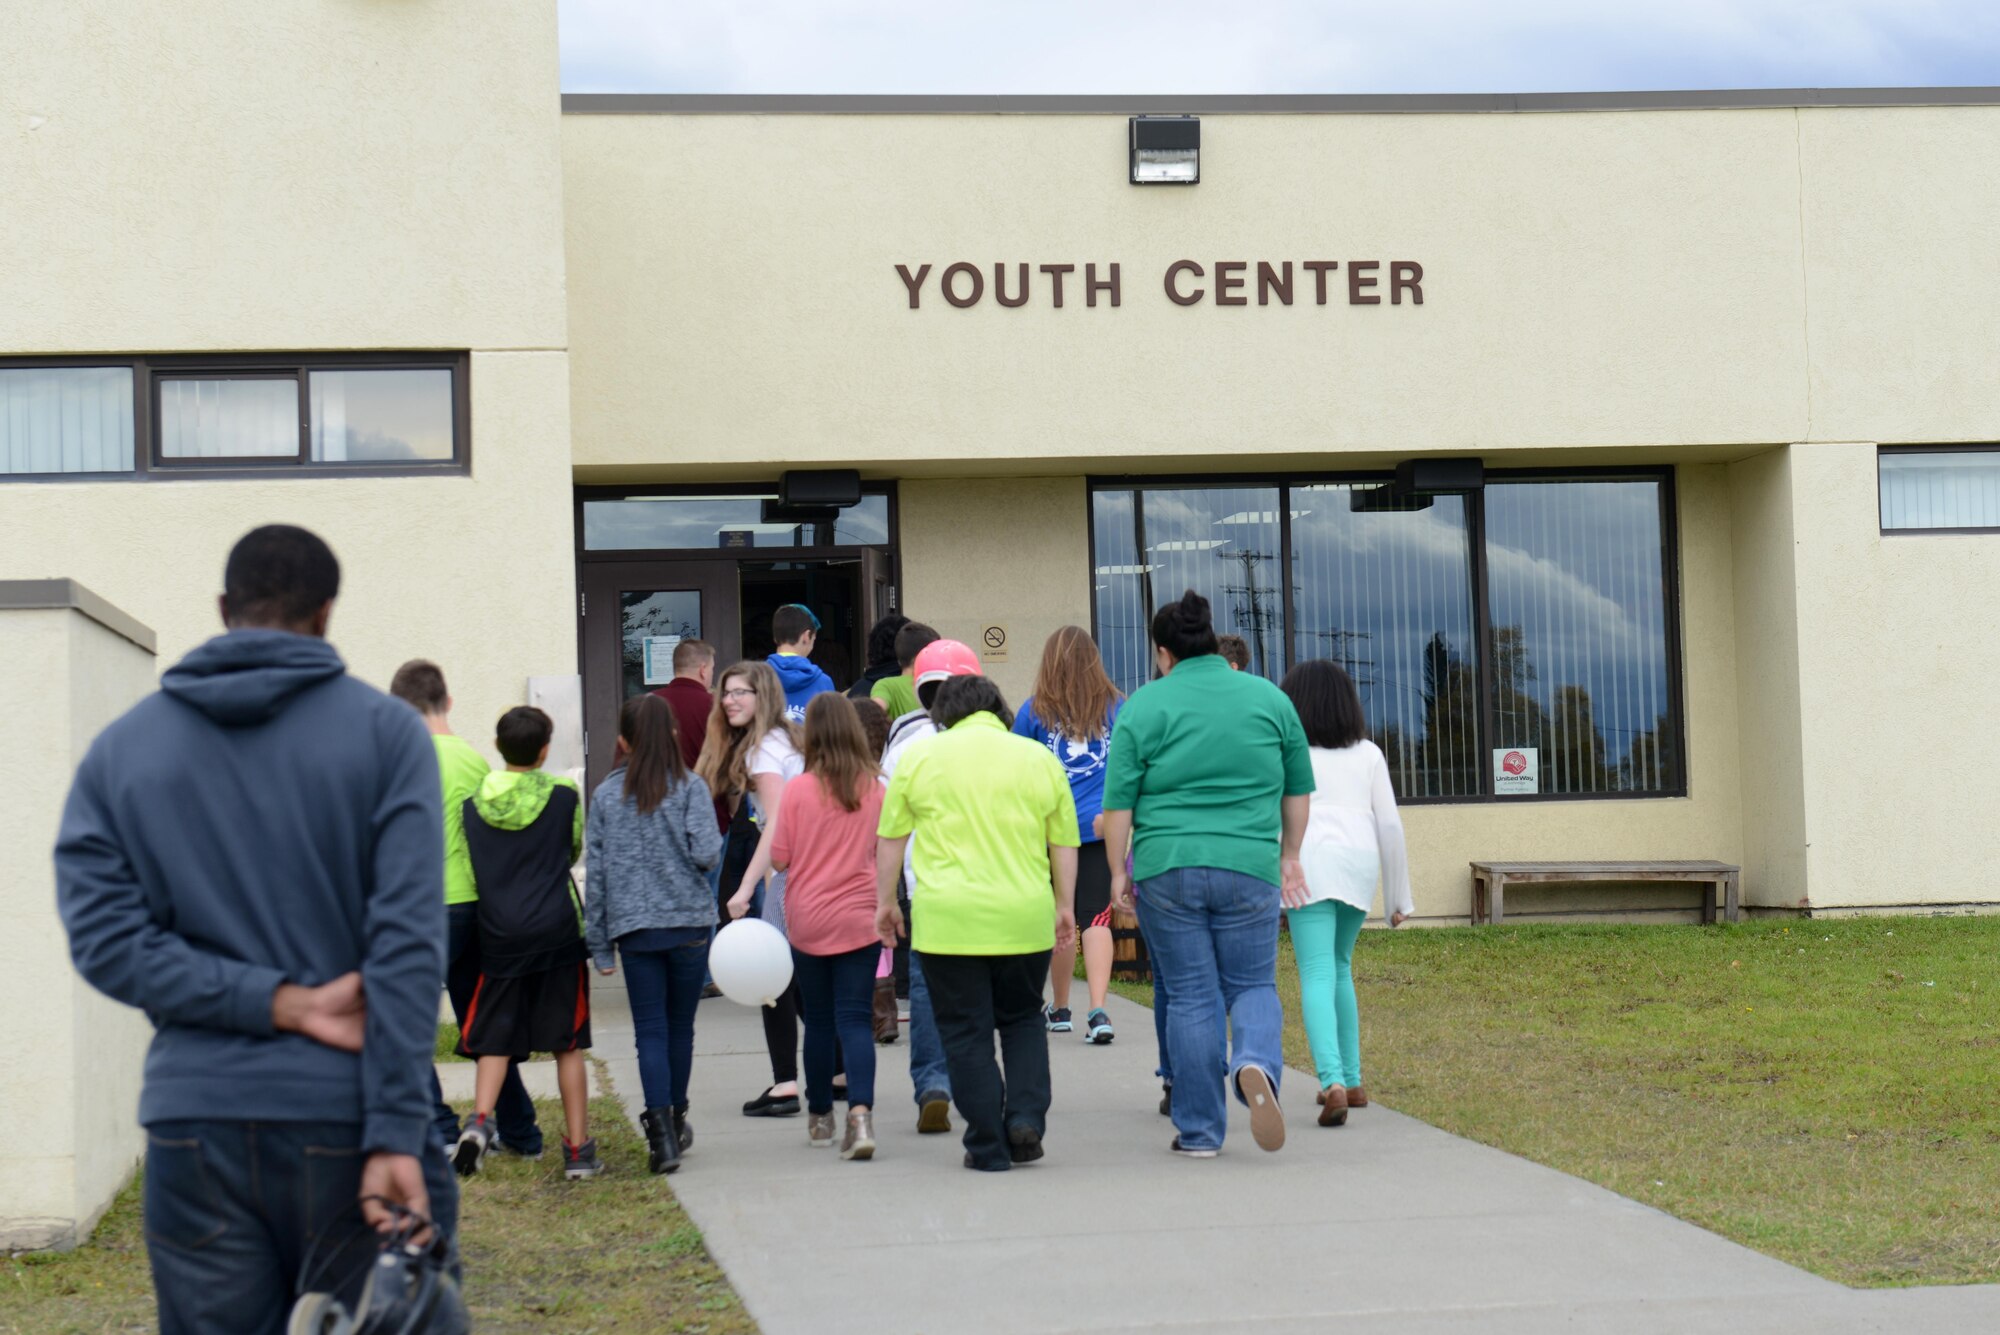 Children, parents and Kennecott Youth Center workers enter the building during the Worldwide Day of Play at Joint Base Elmendorf-Richardson, Alaska, Sept. 21, 2016. The Worldwide Day of Play is an annual event that encourages kids and parents to go outside and play instead of sitting indoors and watching television. Due to inclement weather, the Kennecott Youth Center provided several games and stations like the cupcake walk, indoor rock climbing, batting cage, pitching mound and more.